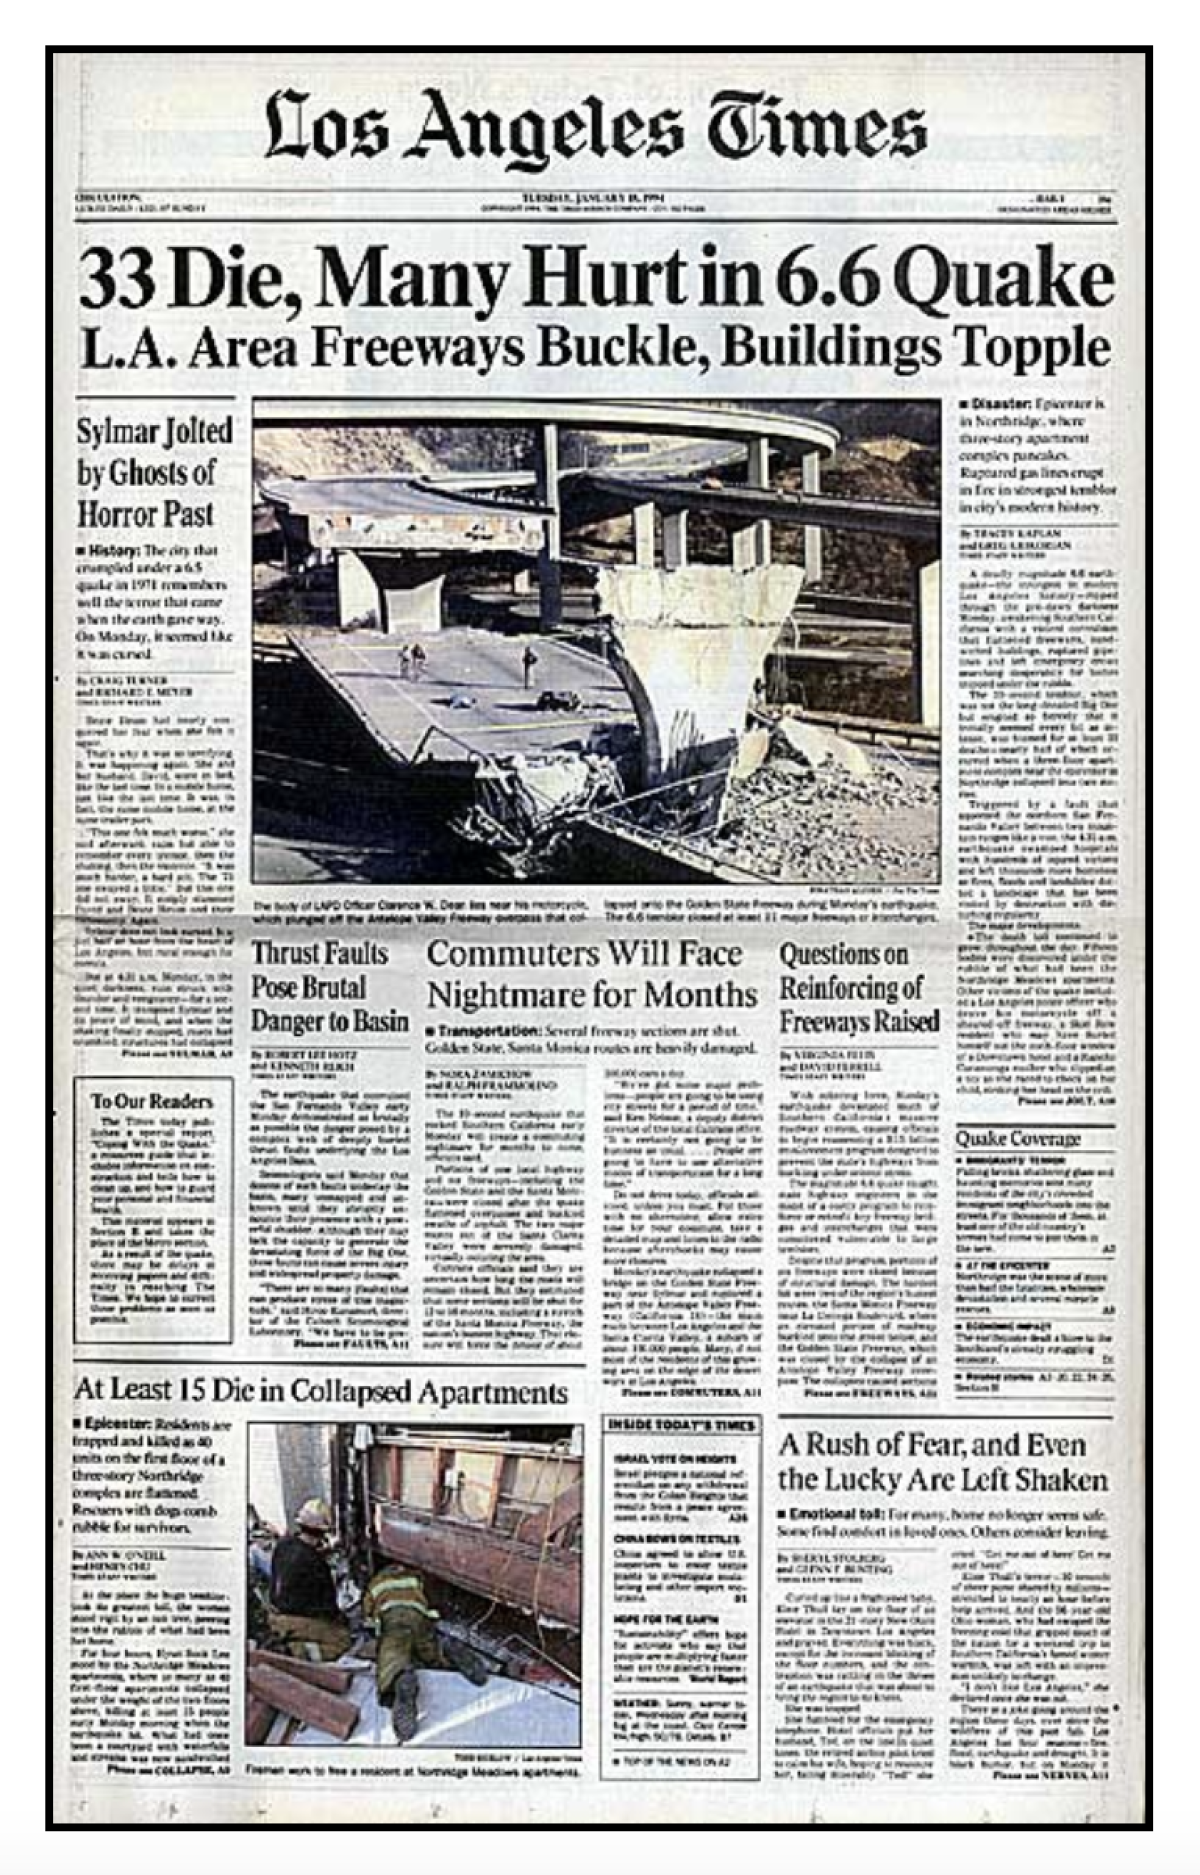 The front page of the Los Angeles Times the day after the 1994 Northridge earthquake.